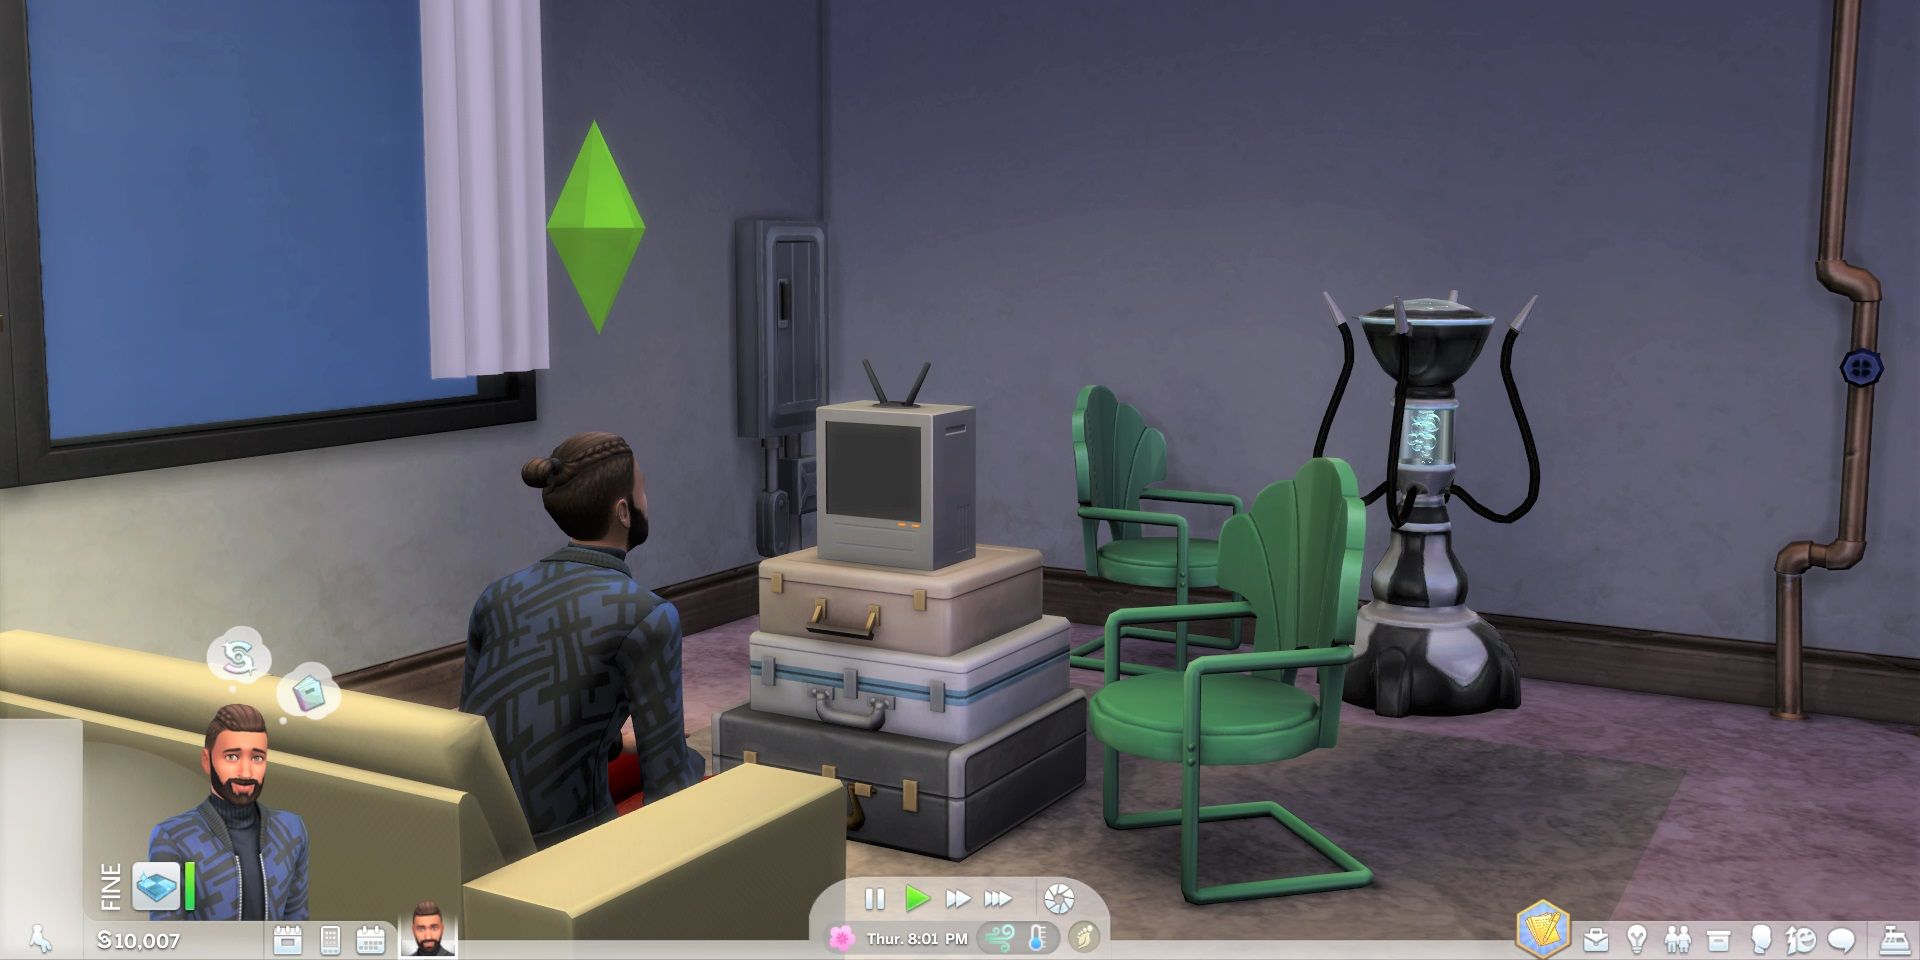 Salim Benali watches TV (even though the screen is still black) in his San Myshuno apartment